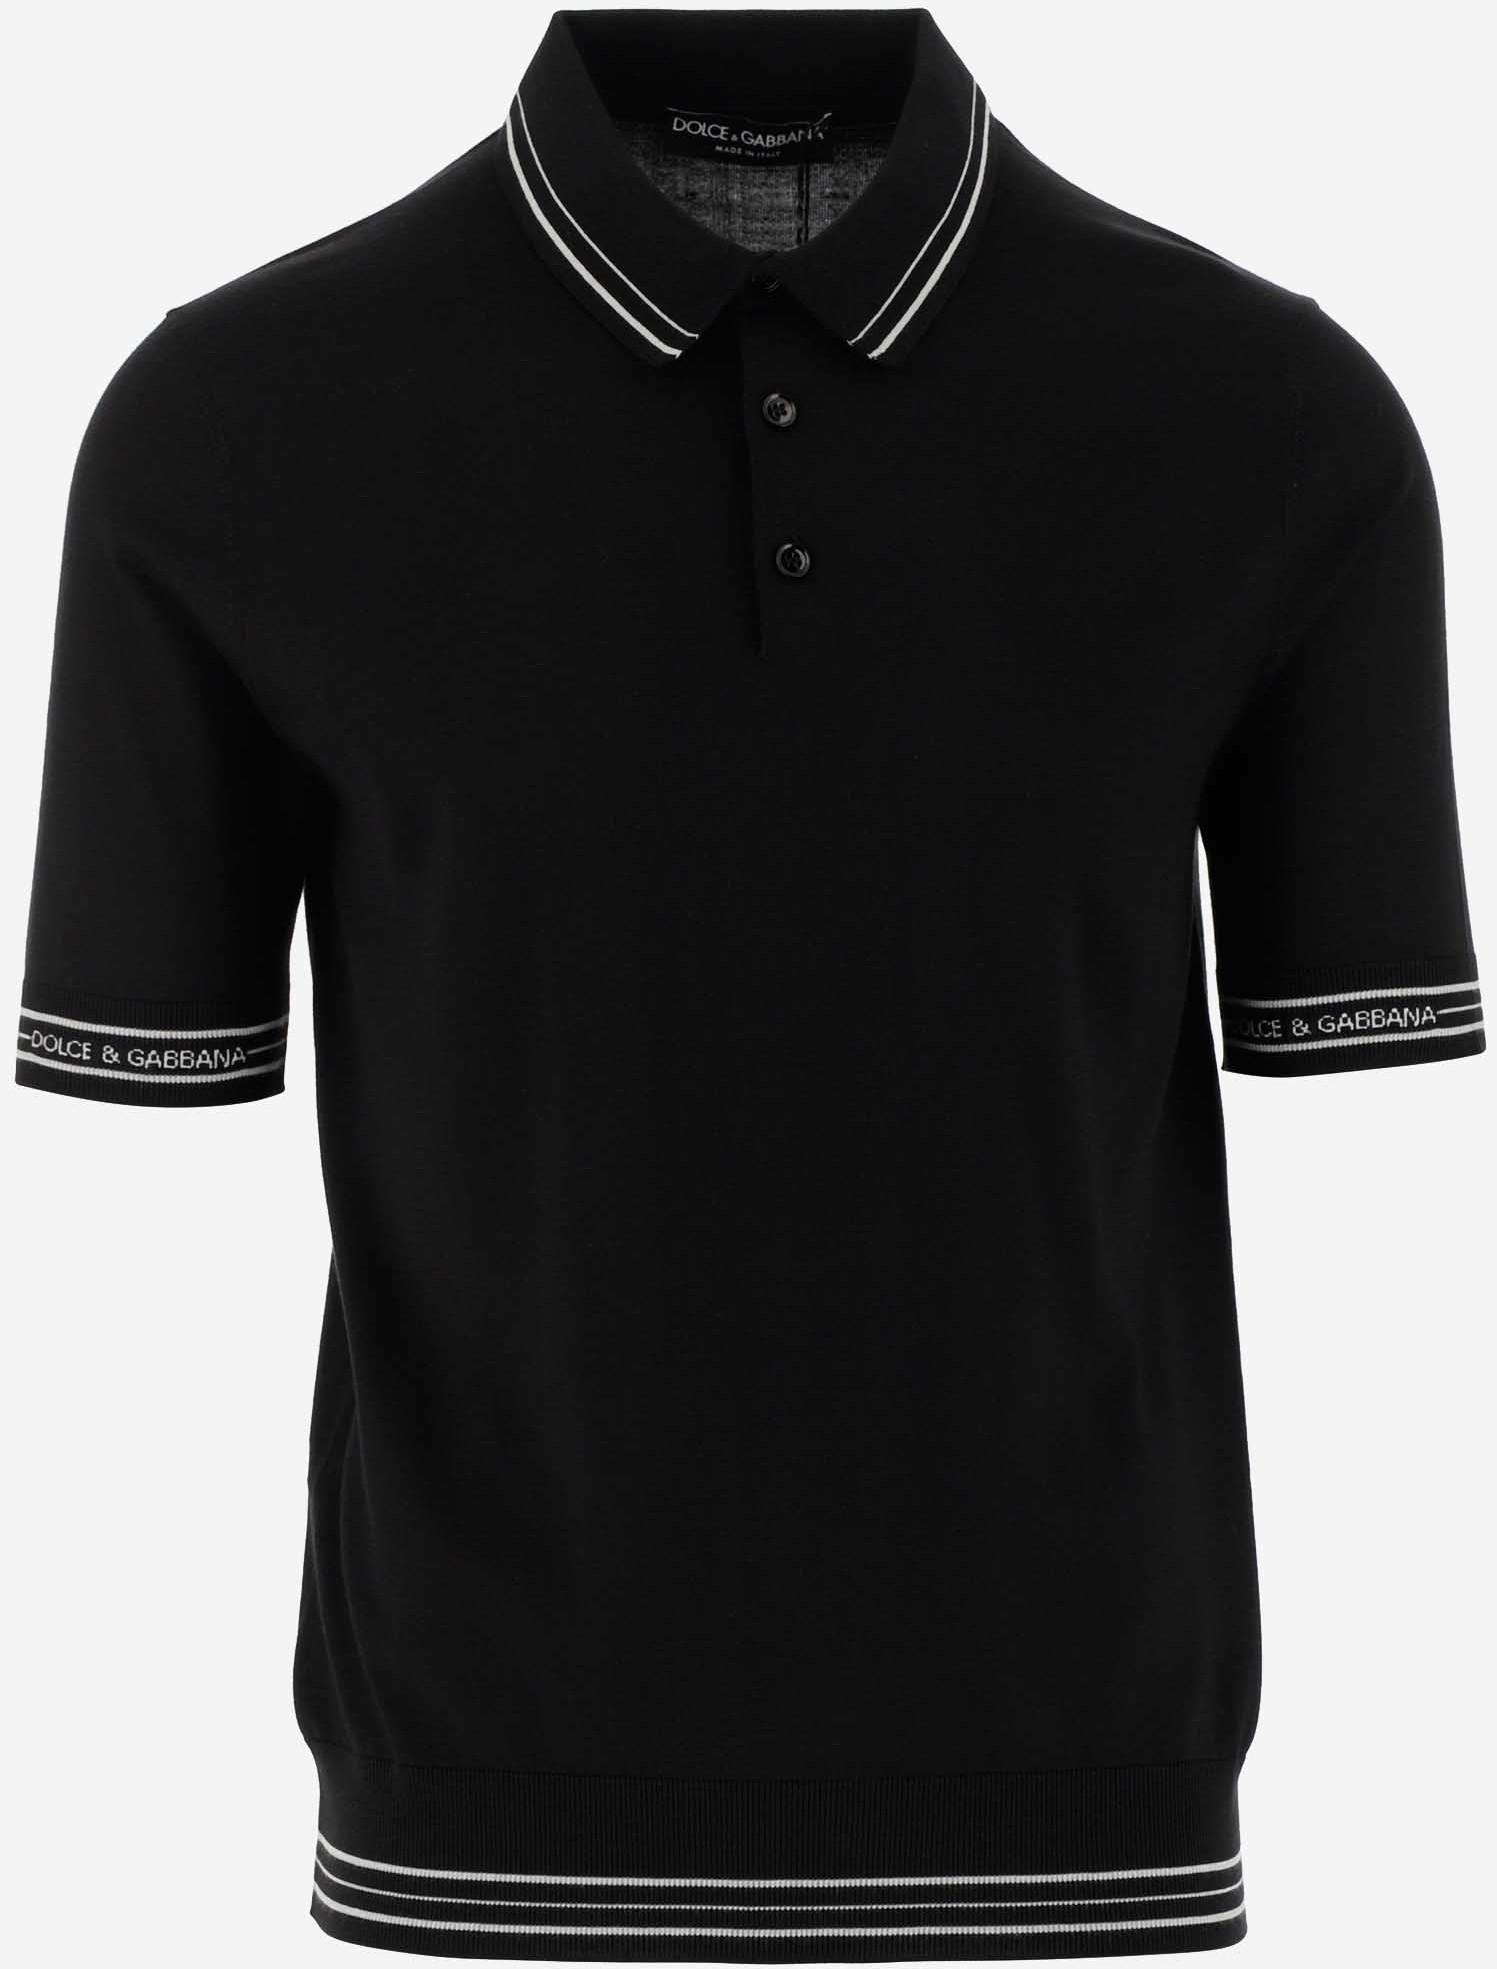 dolce and gabbana mens polo